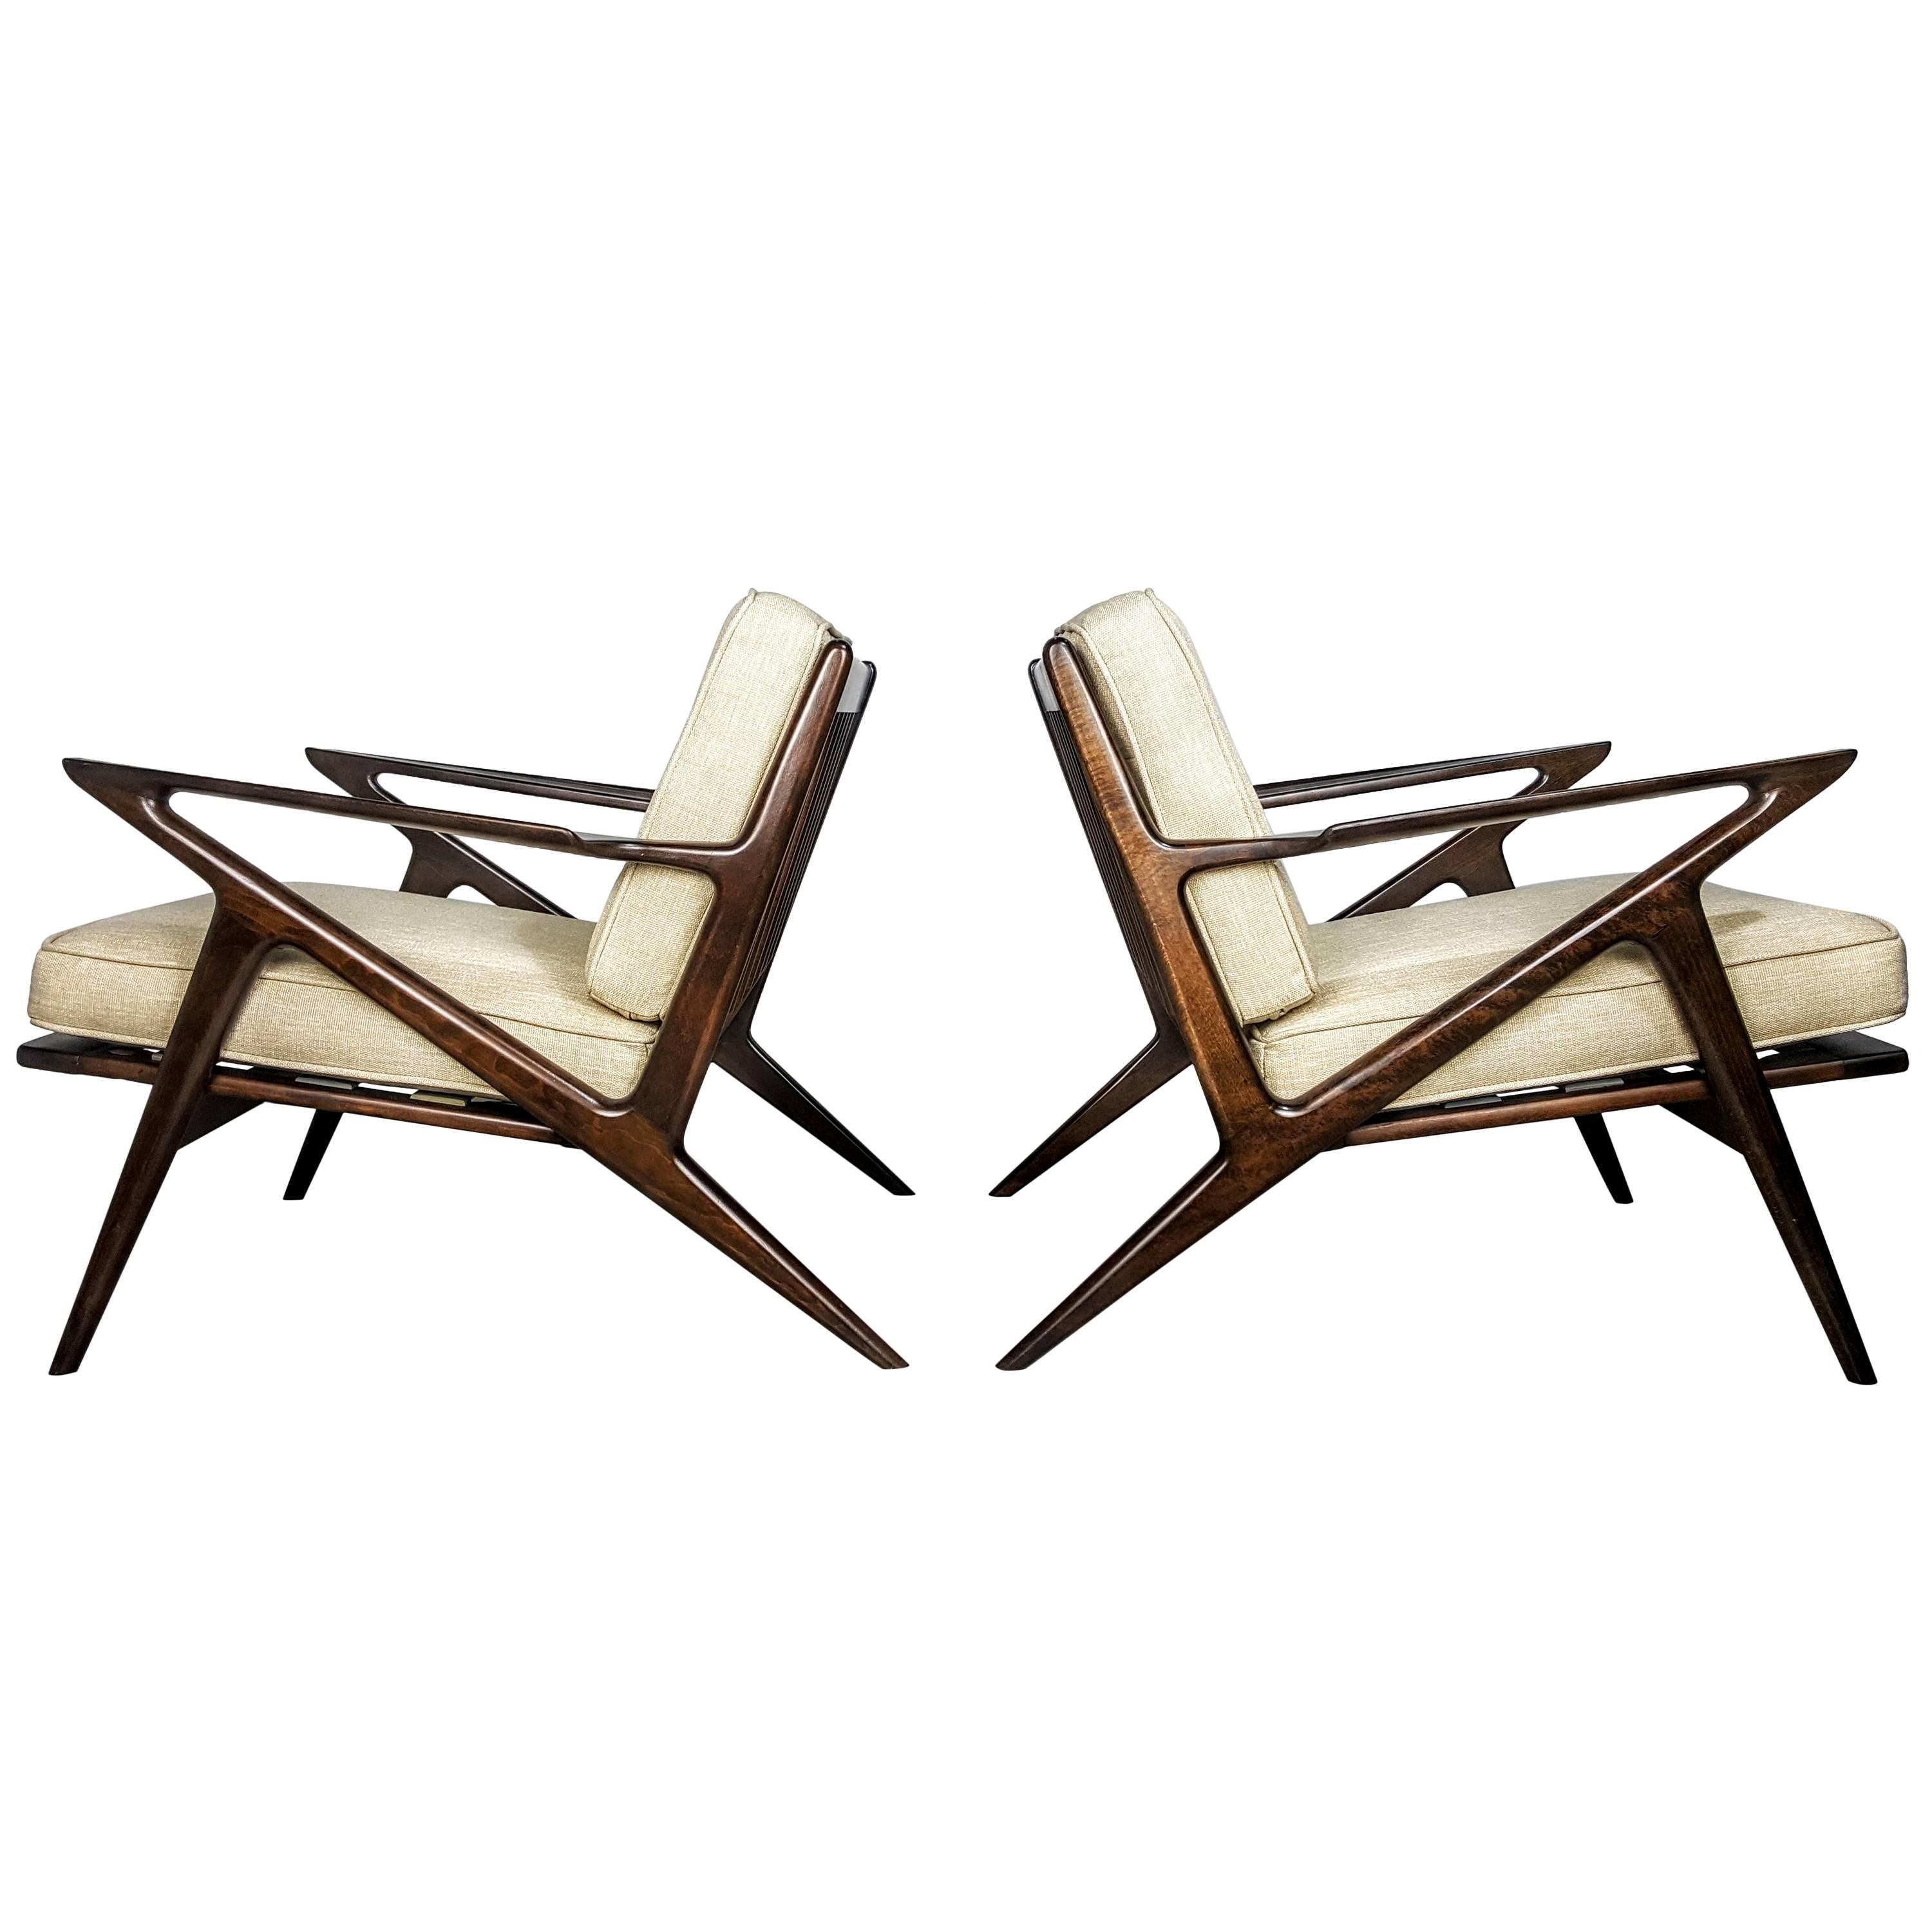 Pair of Sculptural Lounge Chairs by Poul Jensen for Selig, Denmark 1950s